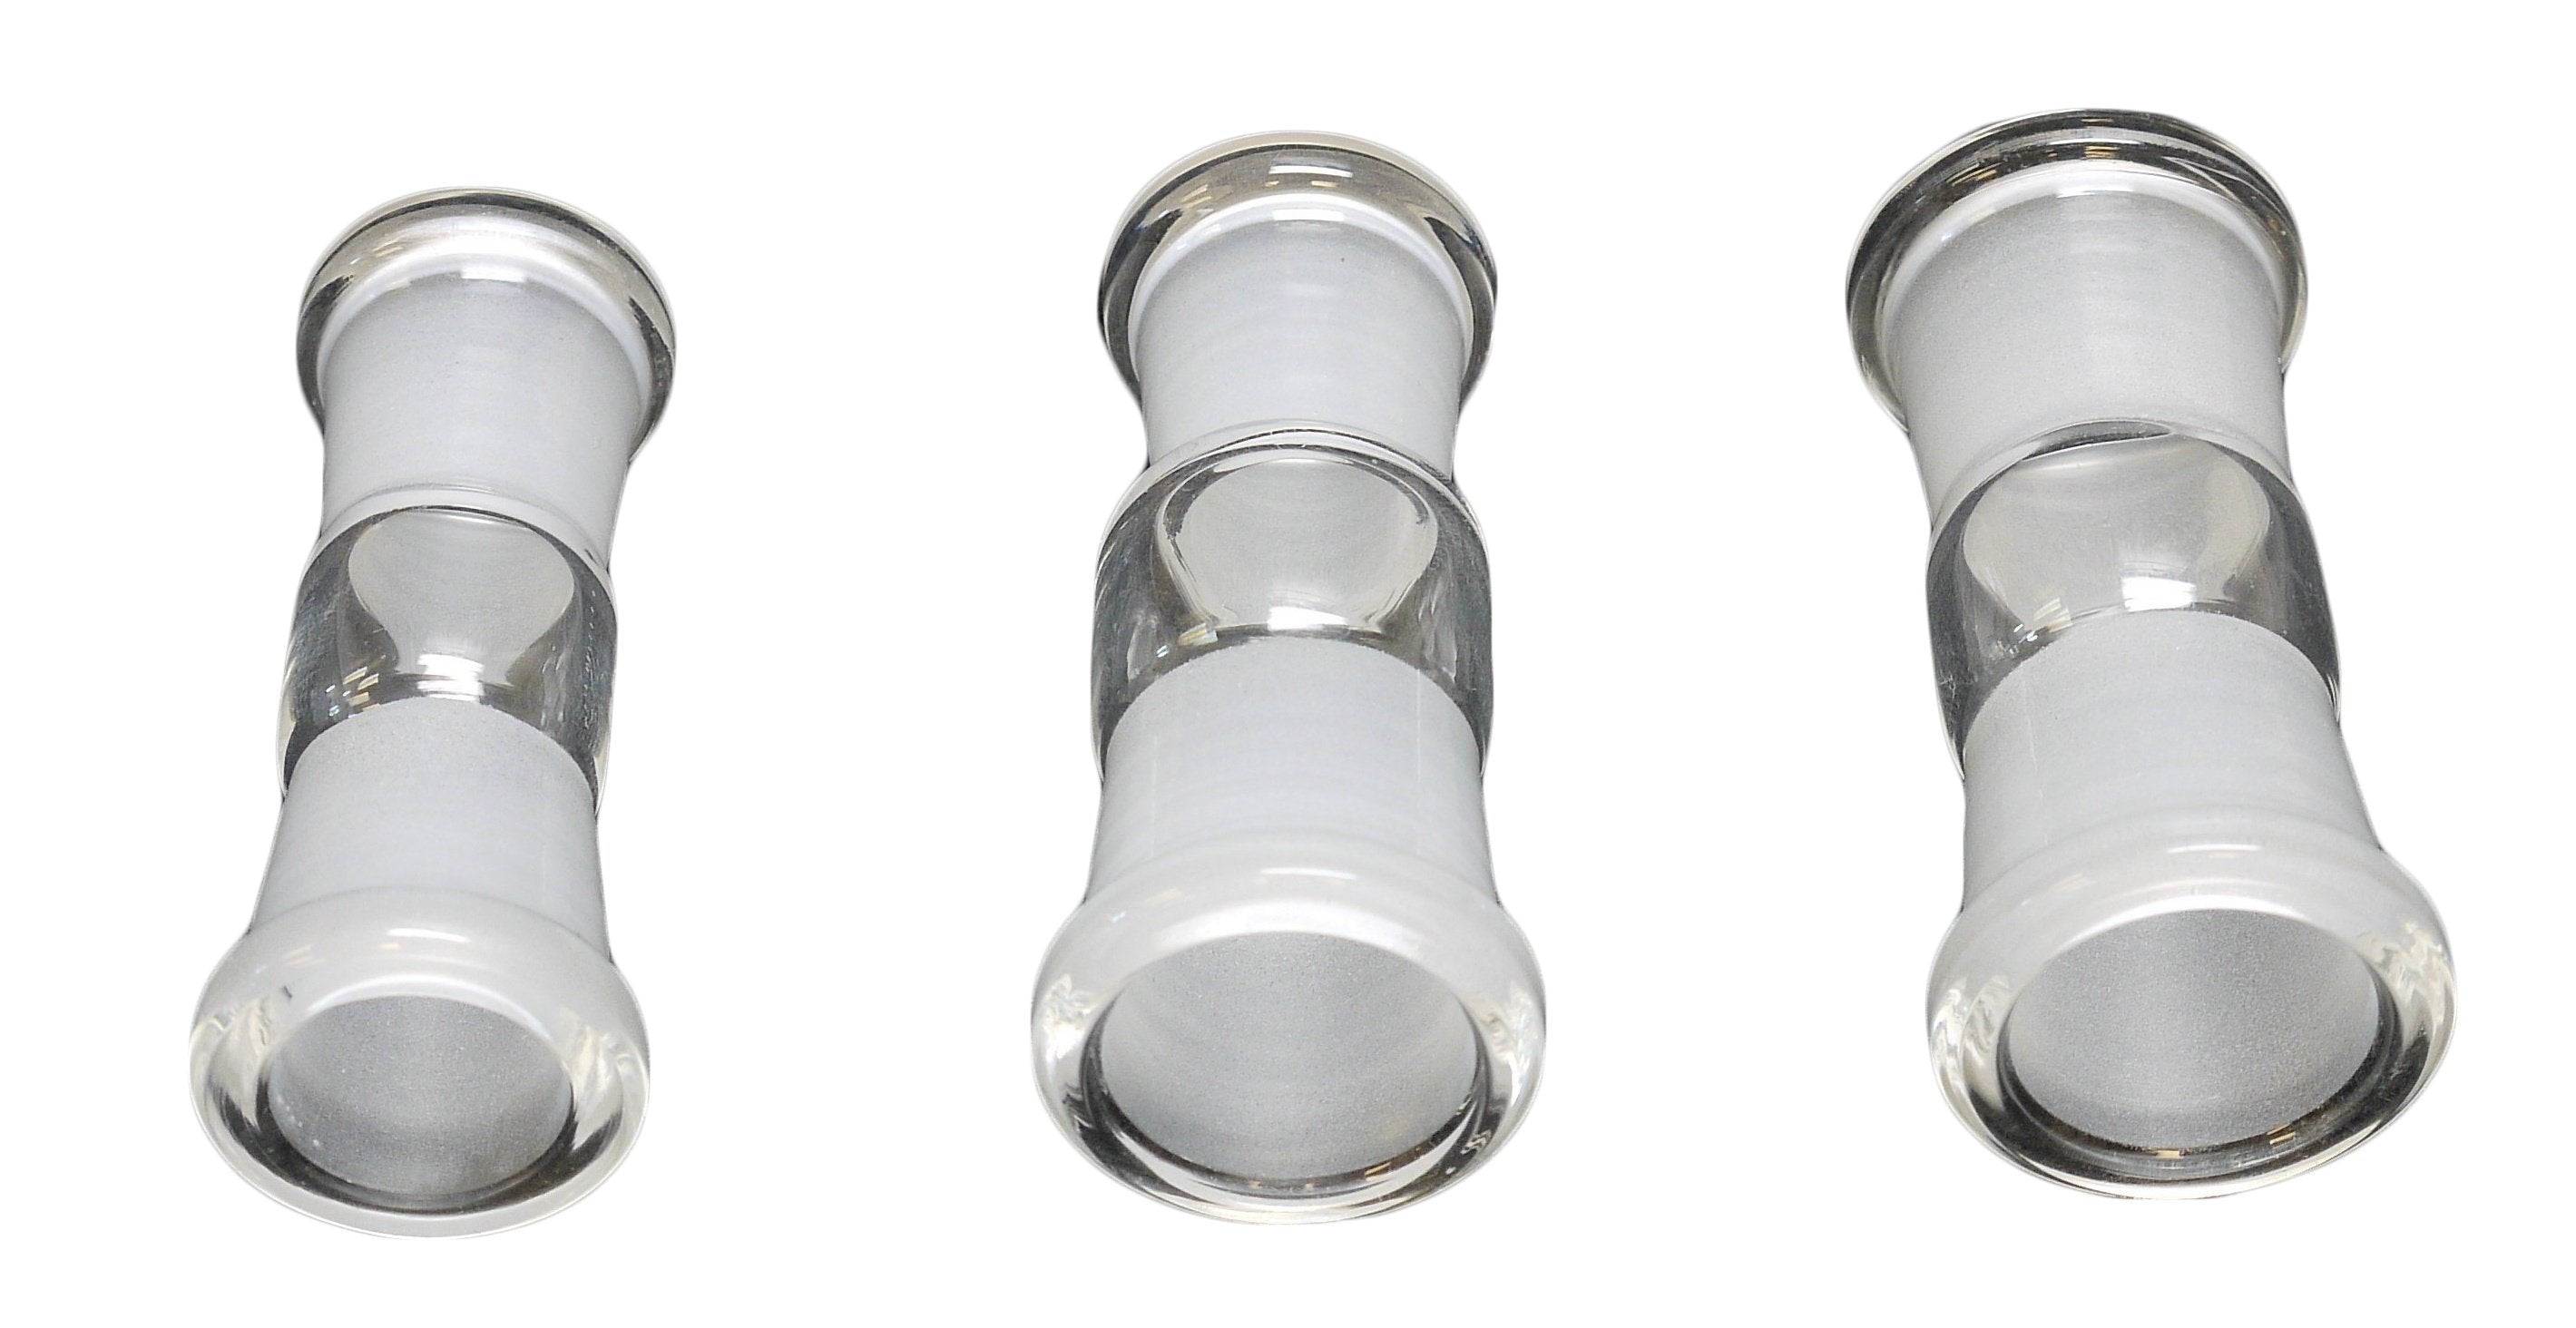 Female to Female connector (14mm to 14mm)